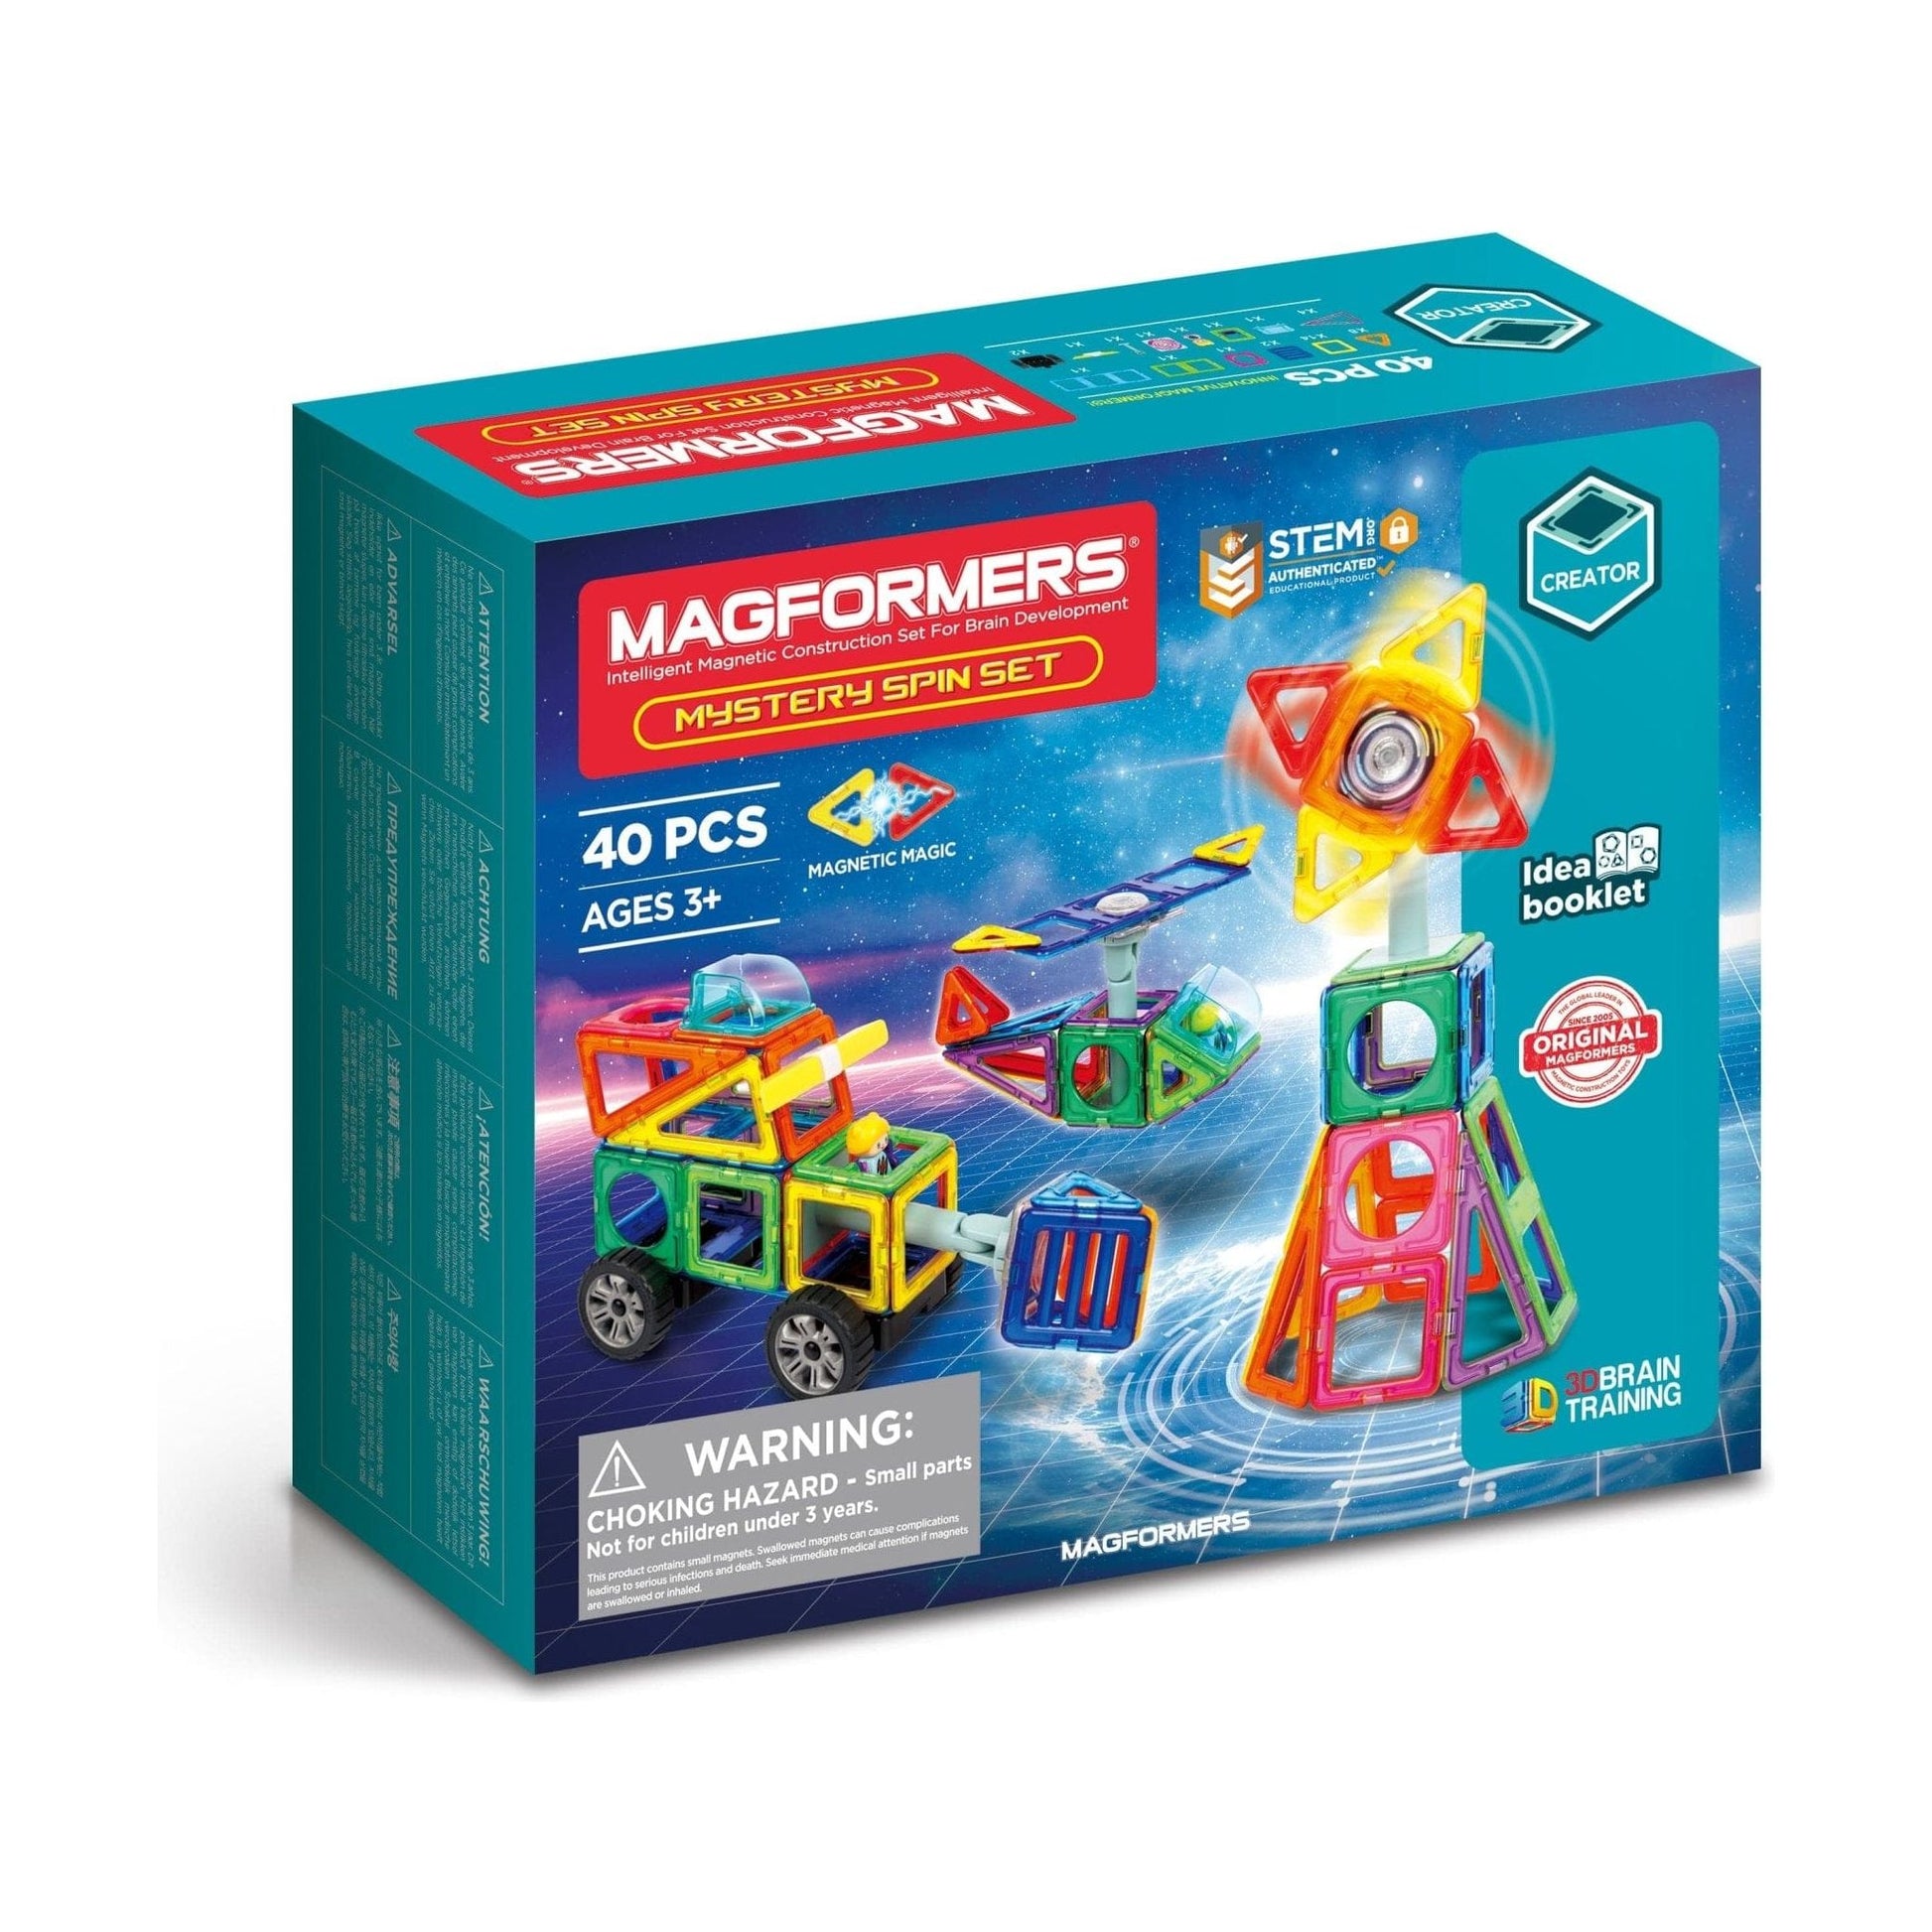 Magformers Construction Toy Mystery Spin Set